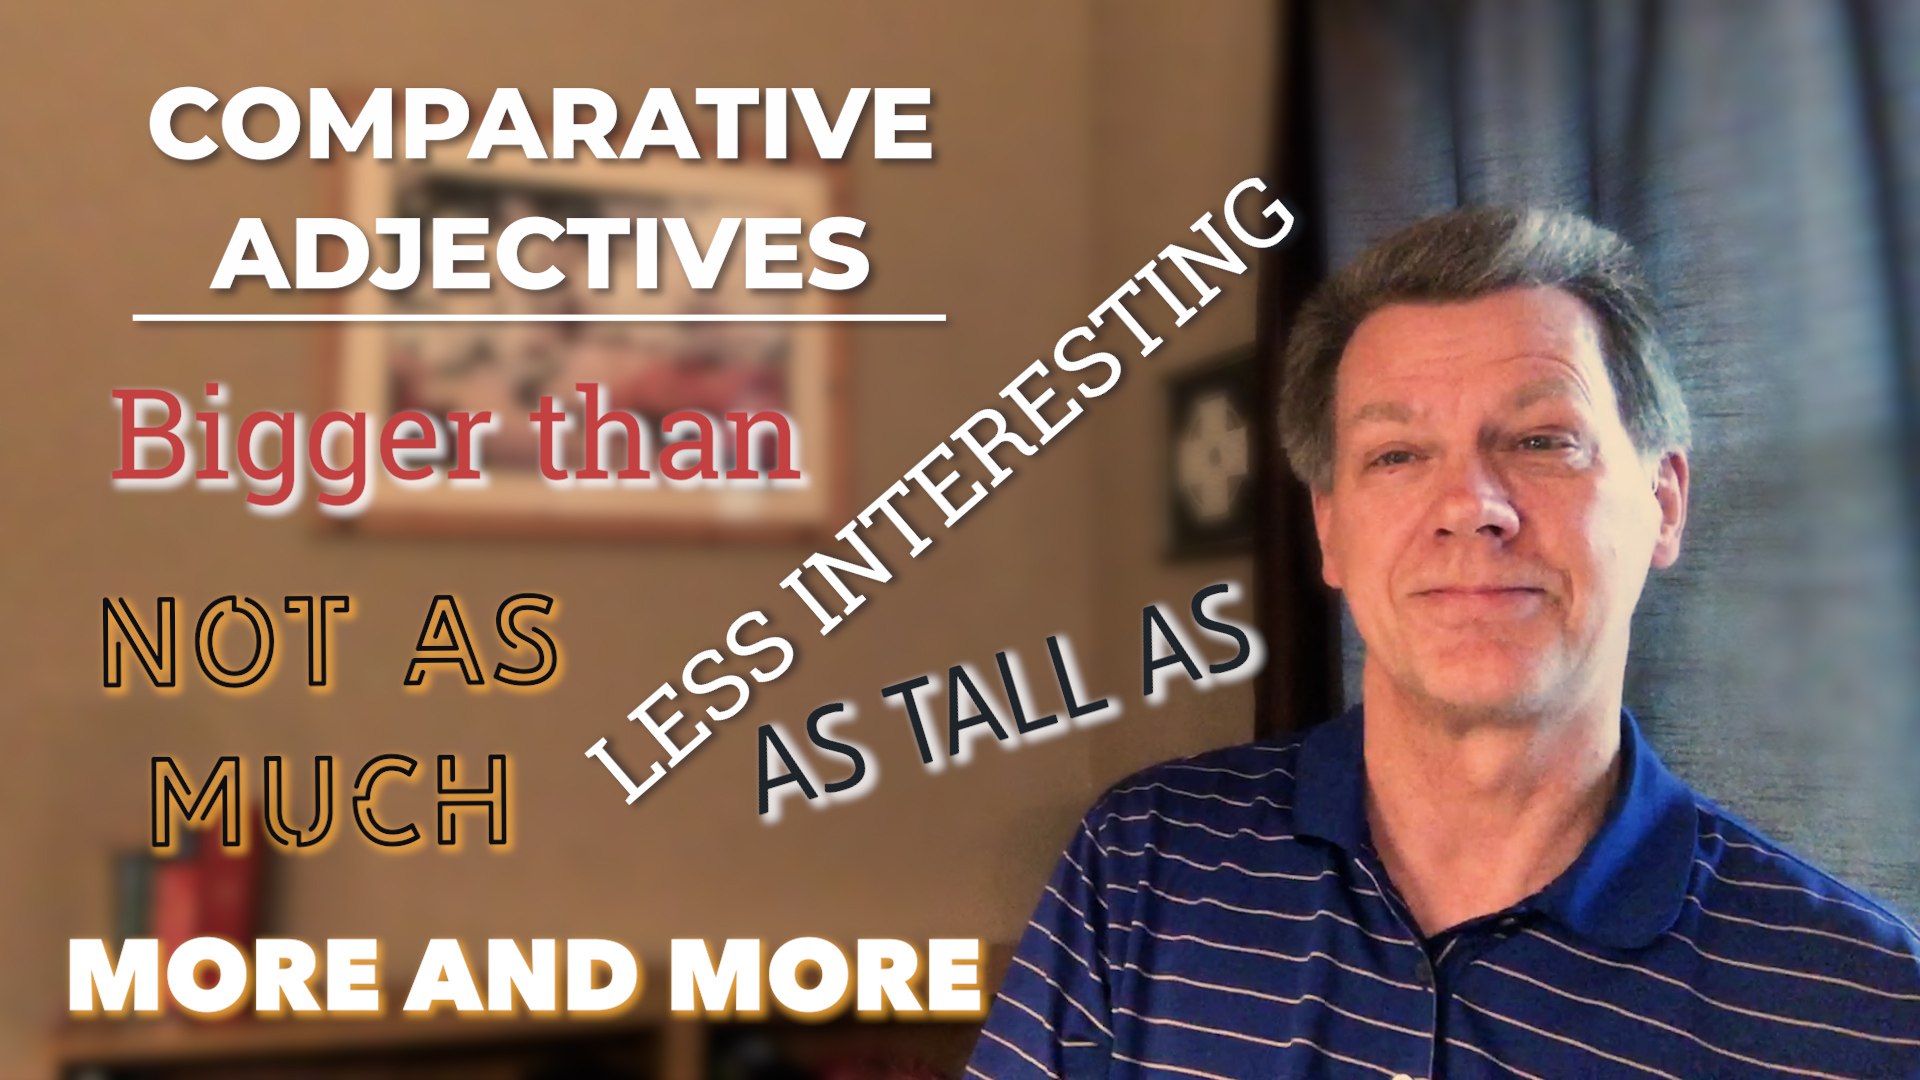 How to Use Comparative Adjectives